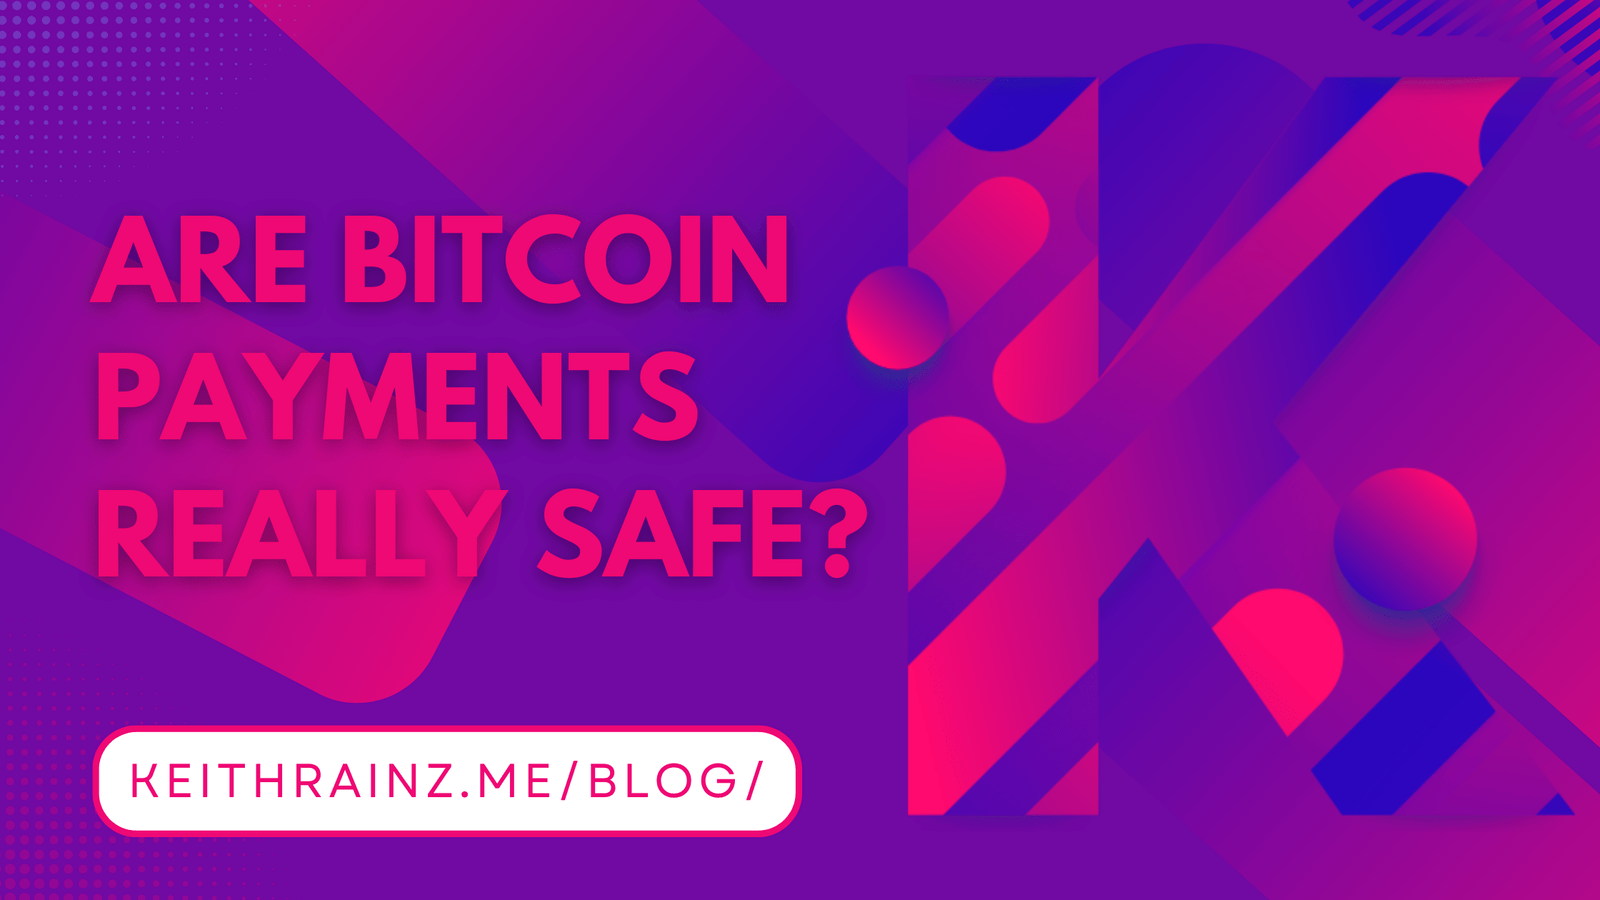 Are Bitcoin payments really safe